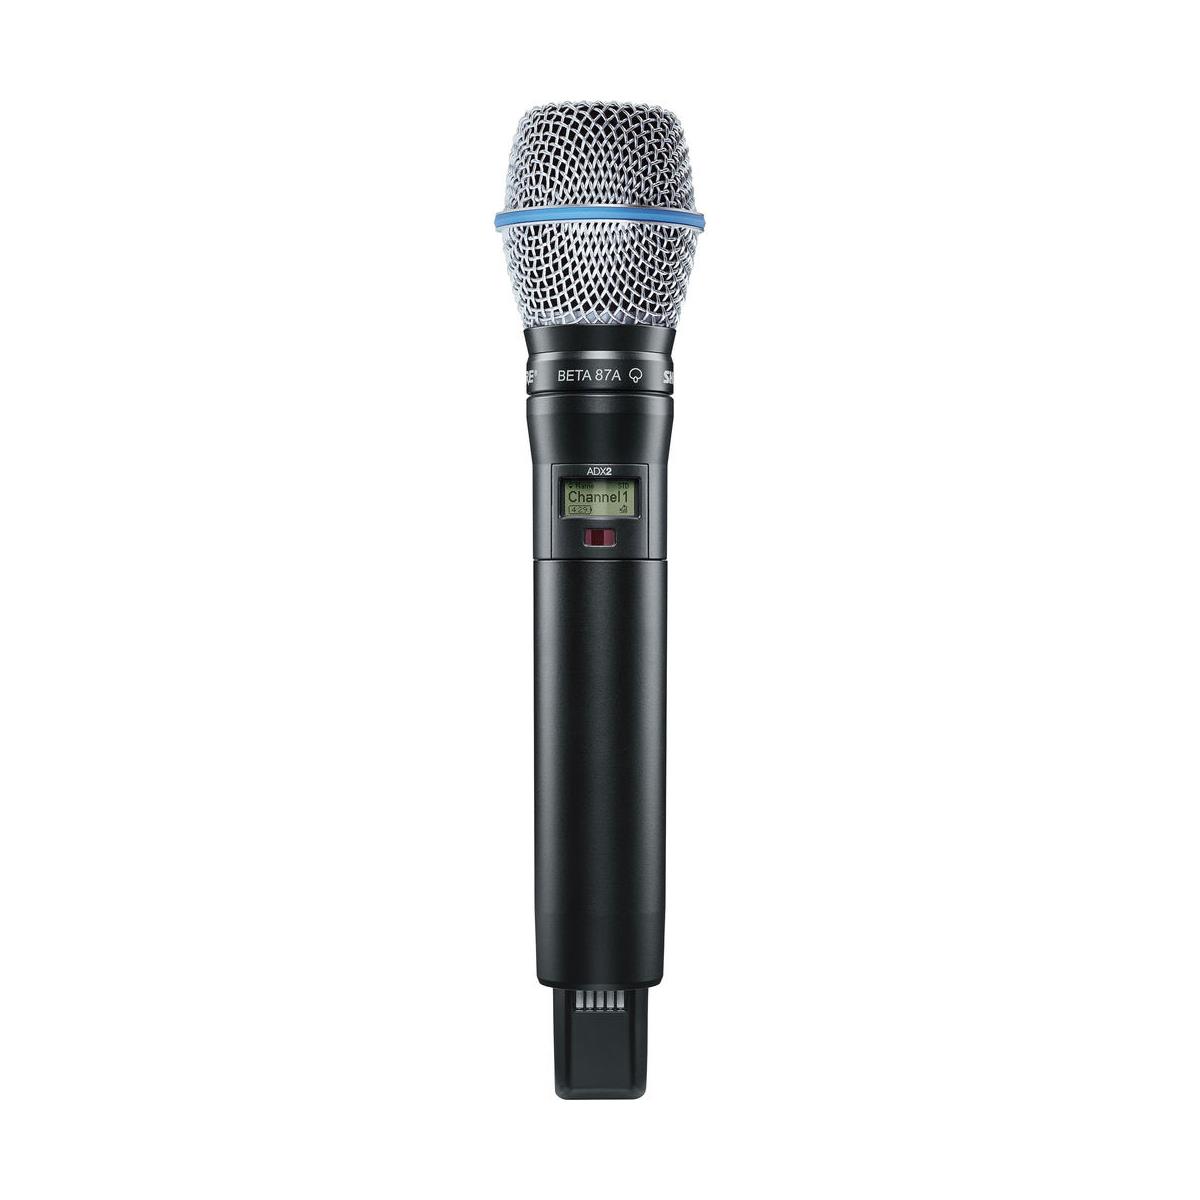 Shure ADX2/B87A Handheld Mic Transmitter w/ Beta 87A Capsule, G57: 470-616MHz -  ADX2/B87A=-G57